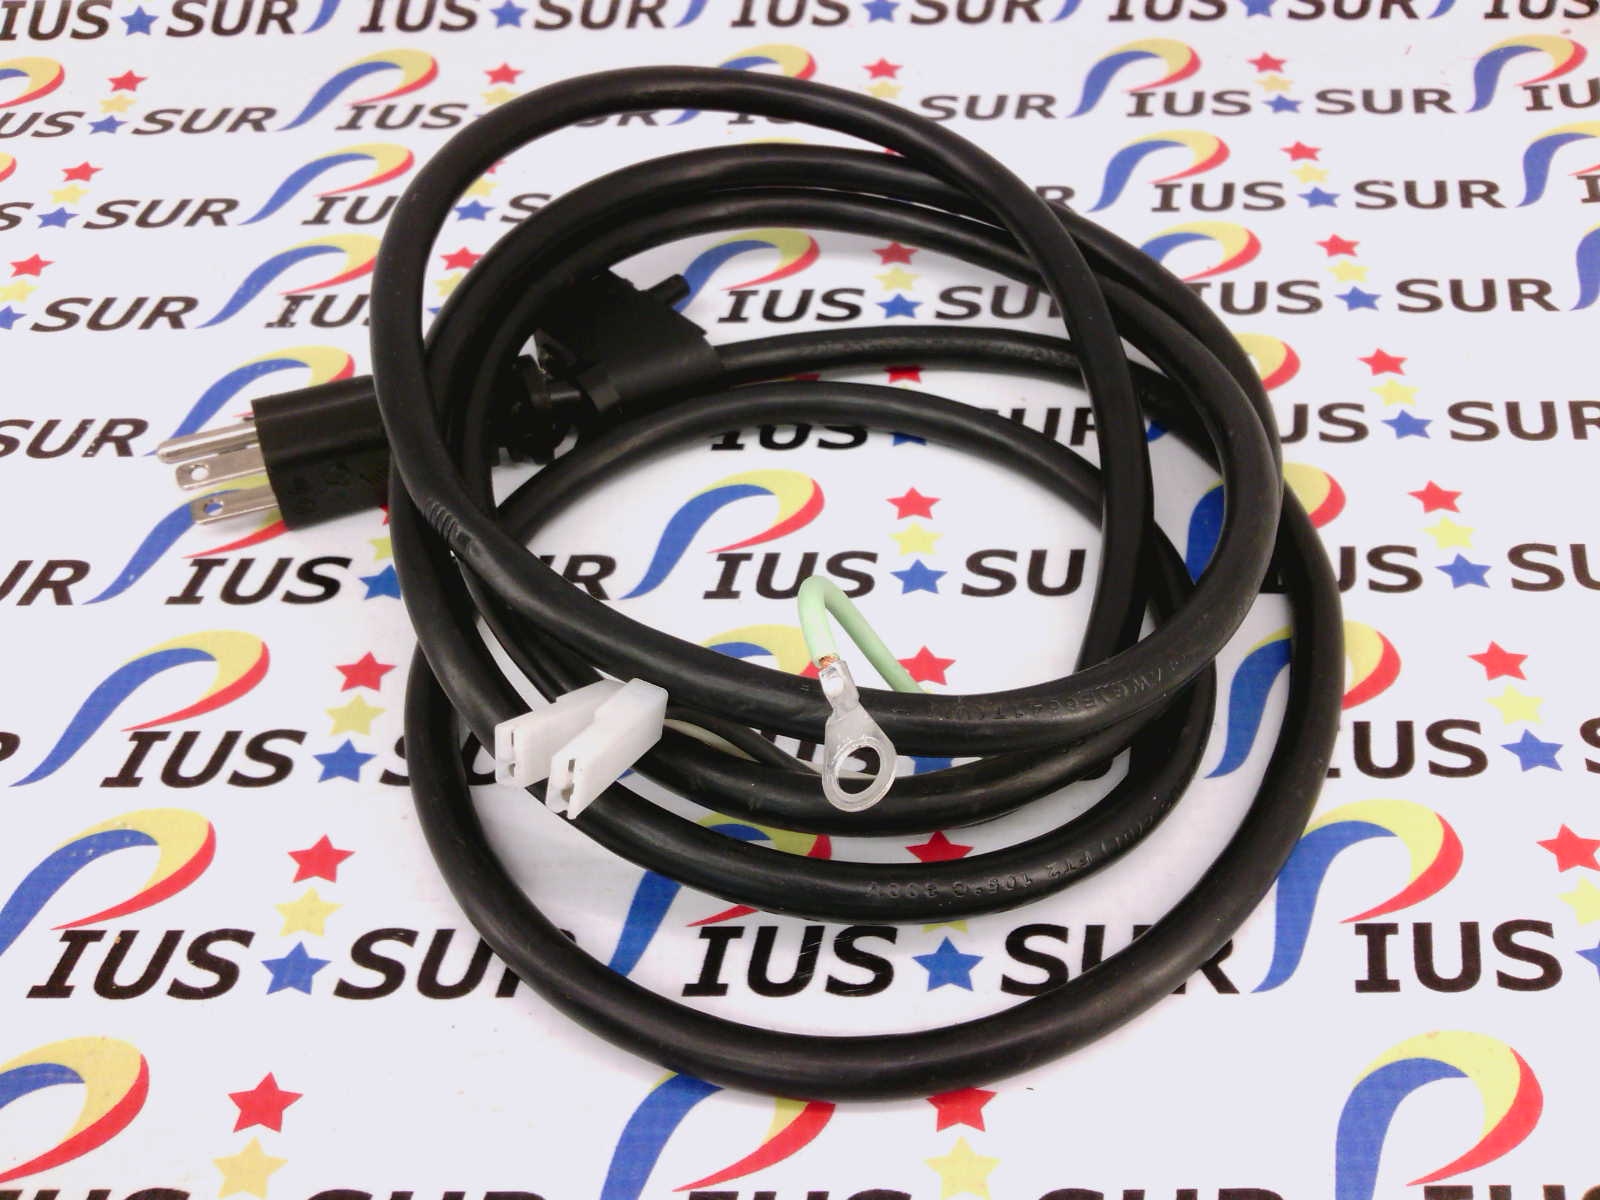 Lincoln Electric Welder 9SS25351-12 Input Power Cord Cable - Surpius